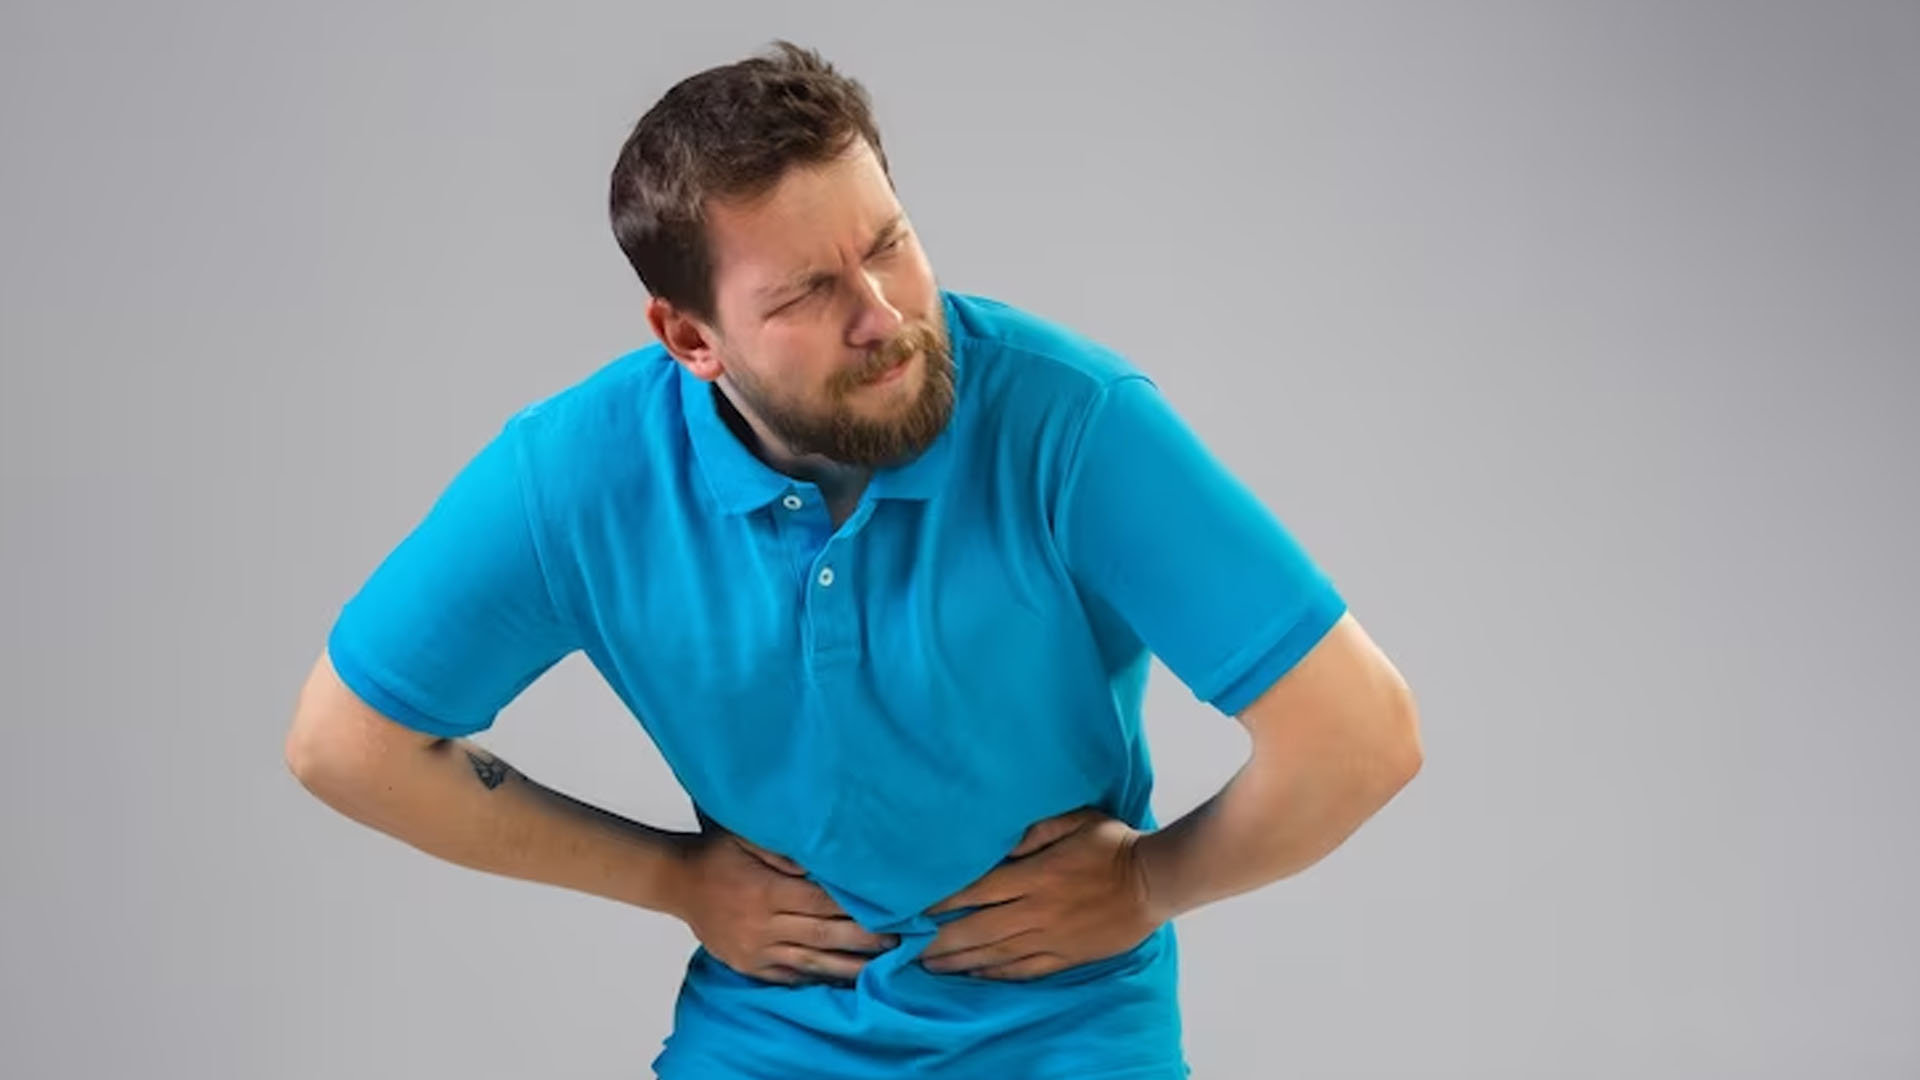 How Can One Recognize the Symptoms of Kidney Failure?